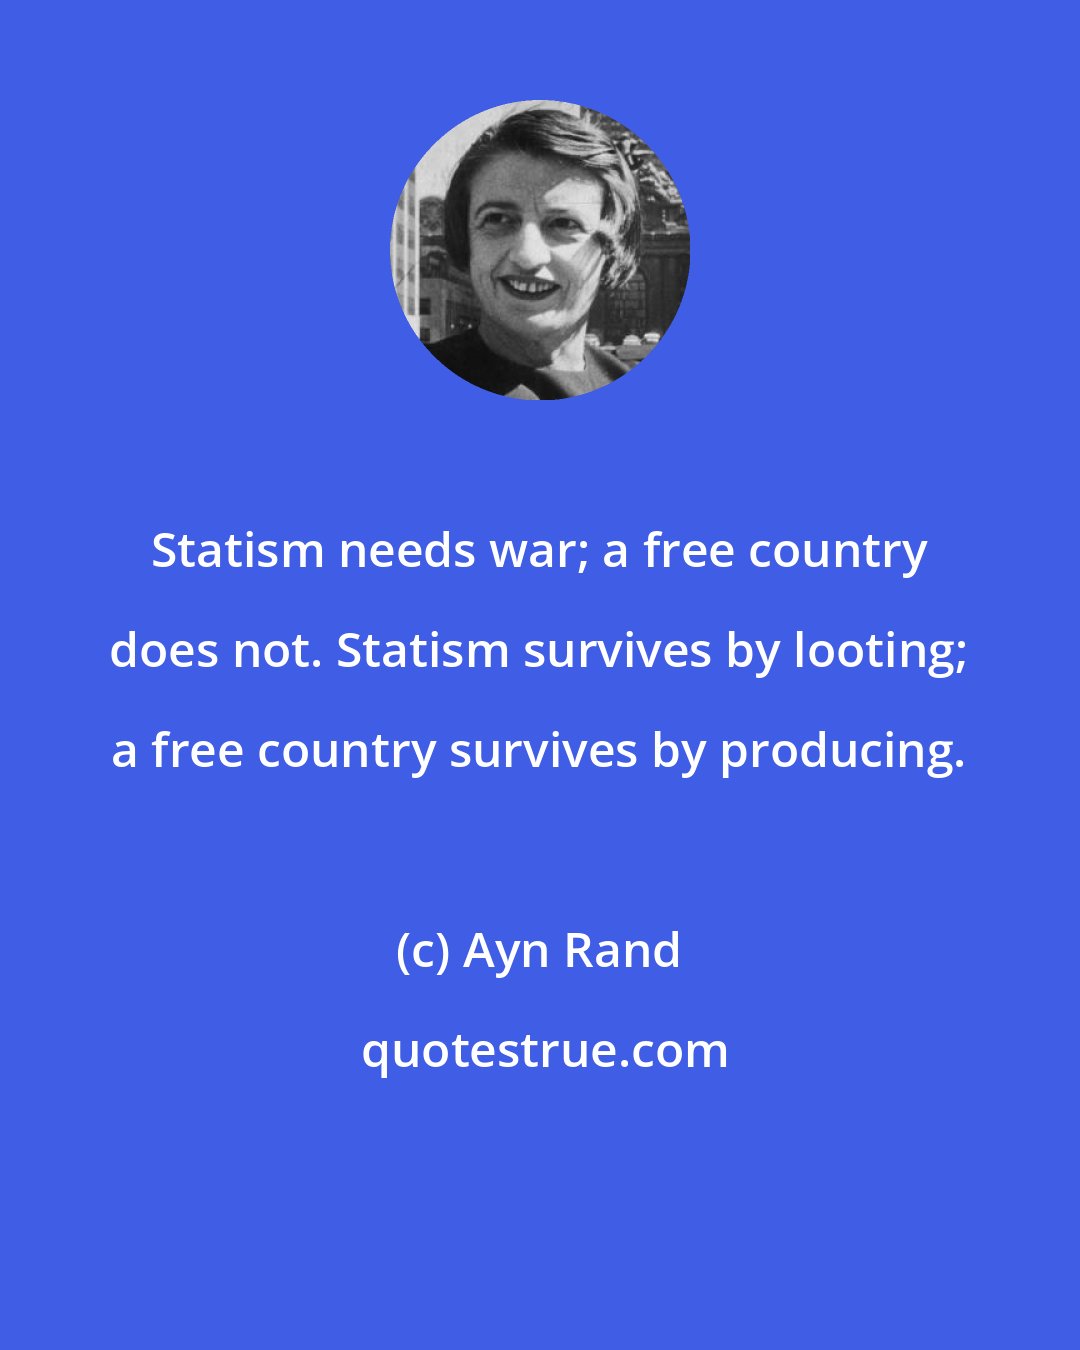 Ayn Rand: Statism needs war; a free country does not. Statism survives by looting; a free country survives by producing.